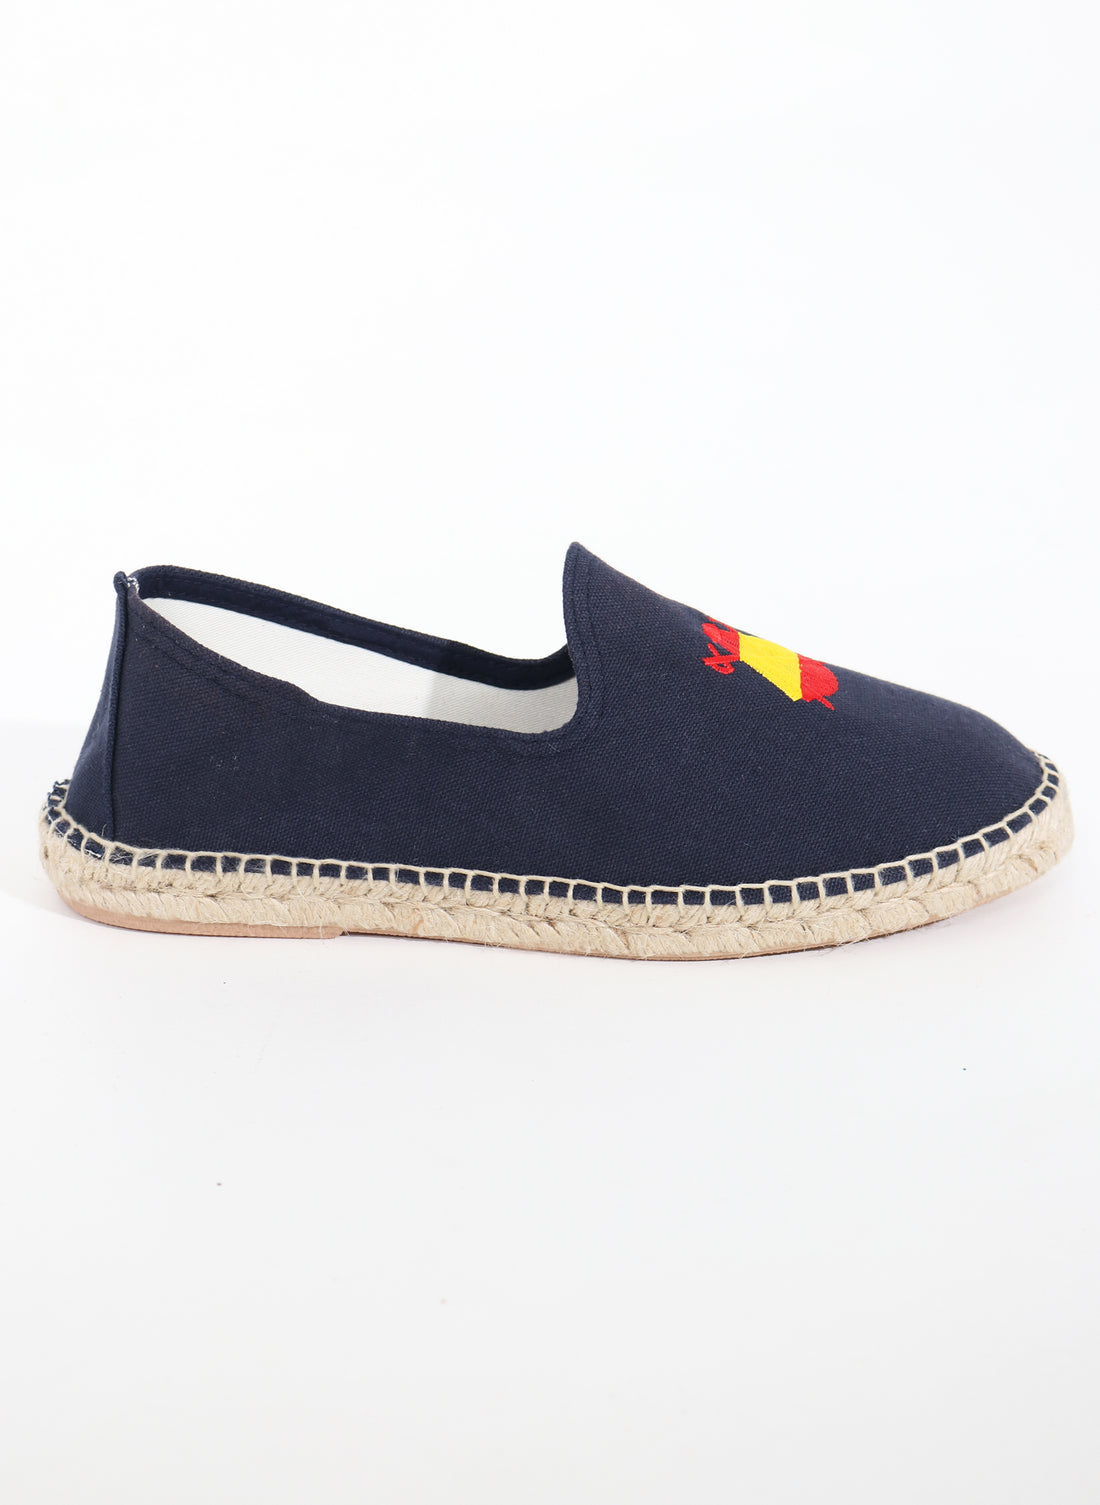 Espadrilles Man Navy Blue Embroidered Pink Cape